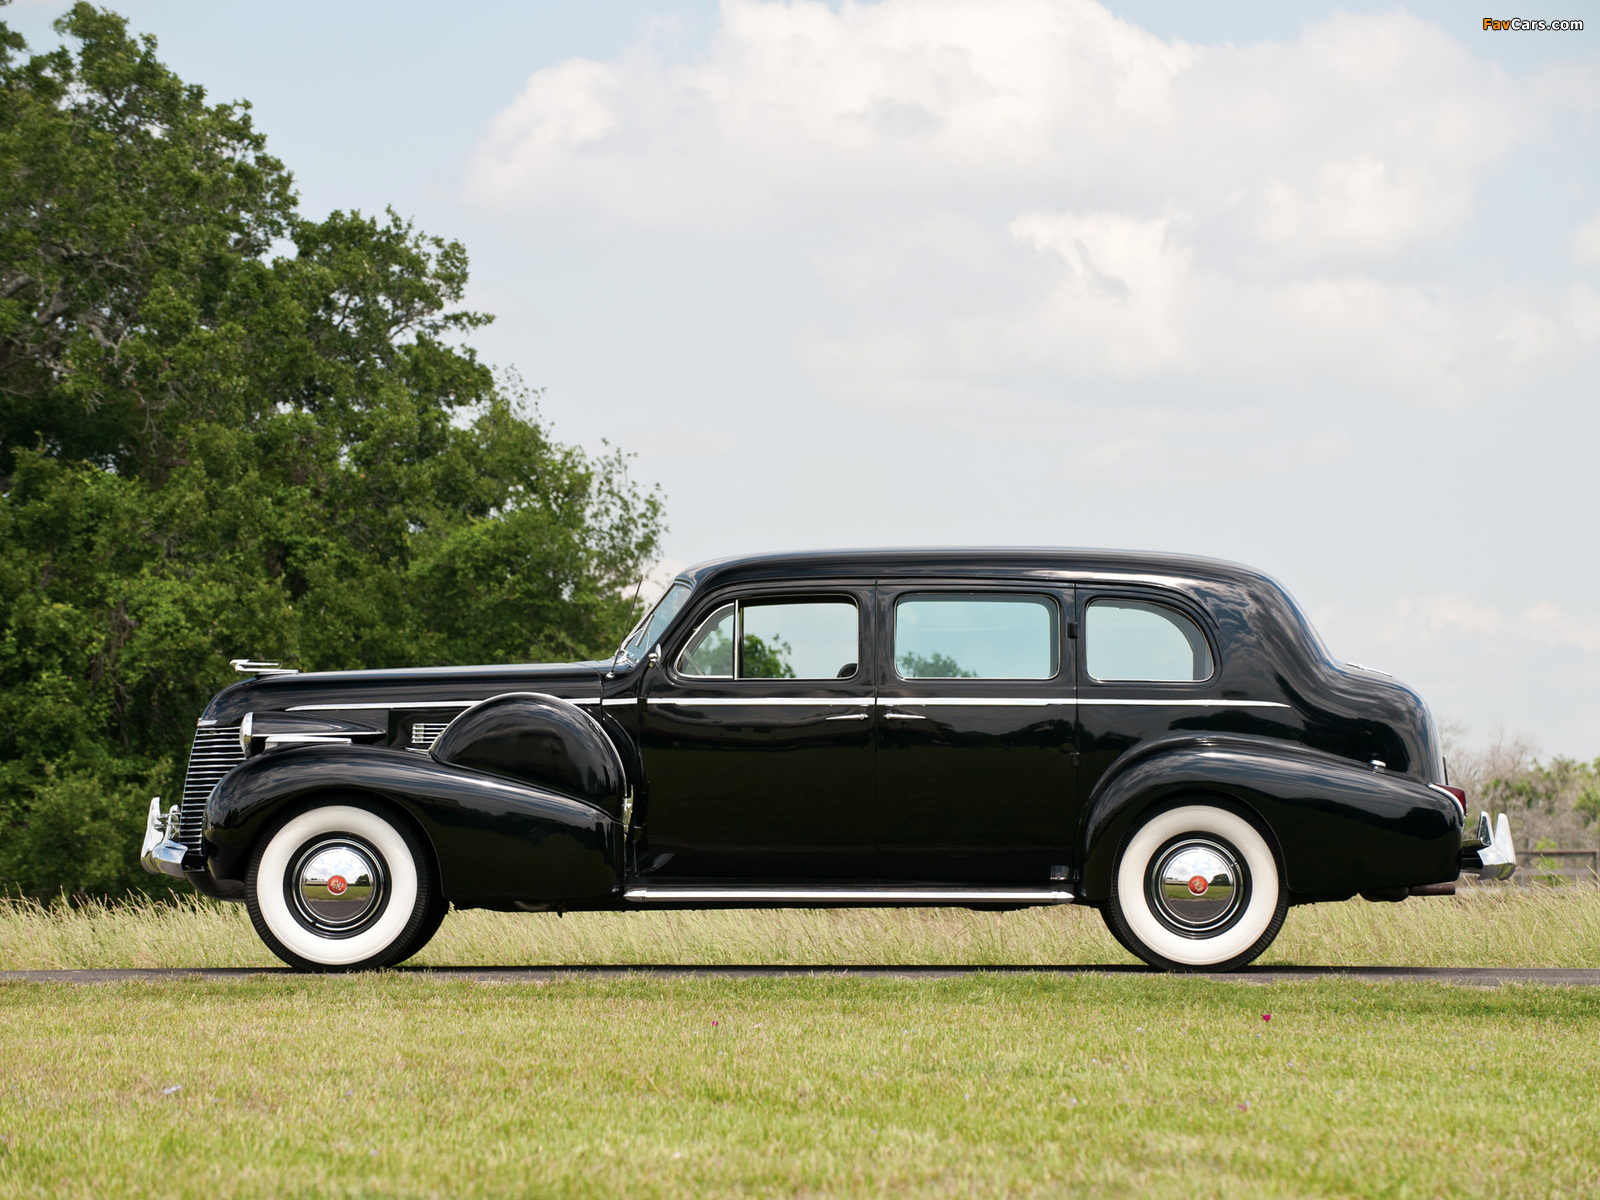 Pictures of Cadillac Fleetwood Seventy-Five Imperial Sedan 1940 (1600 x 1200)